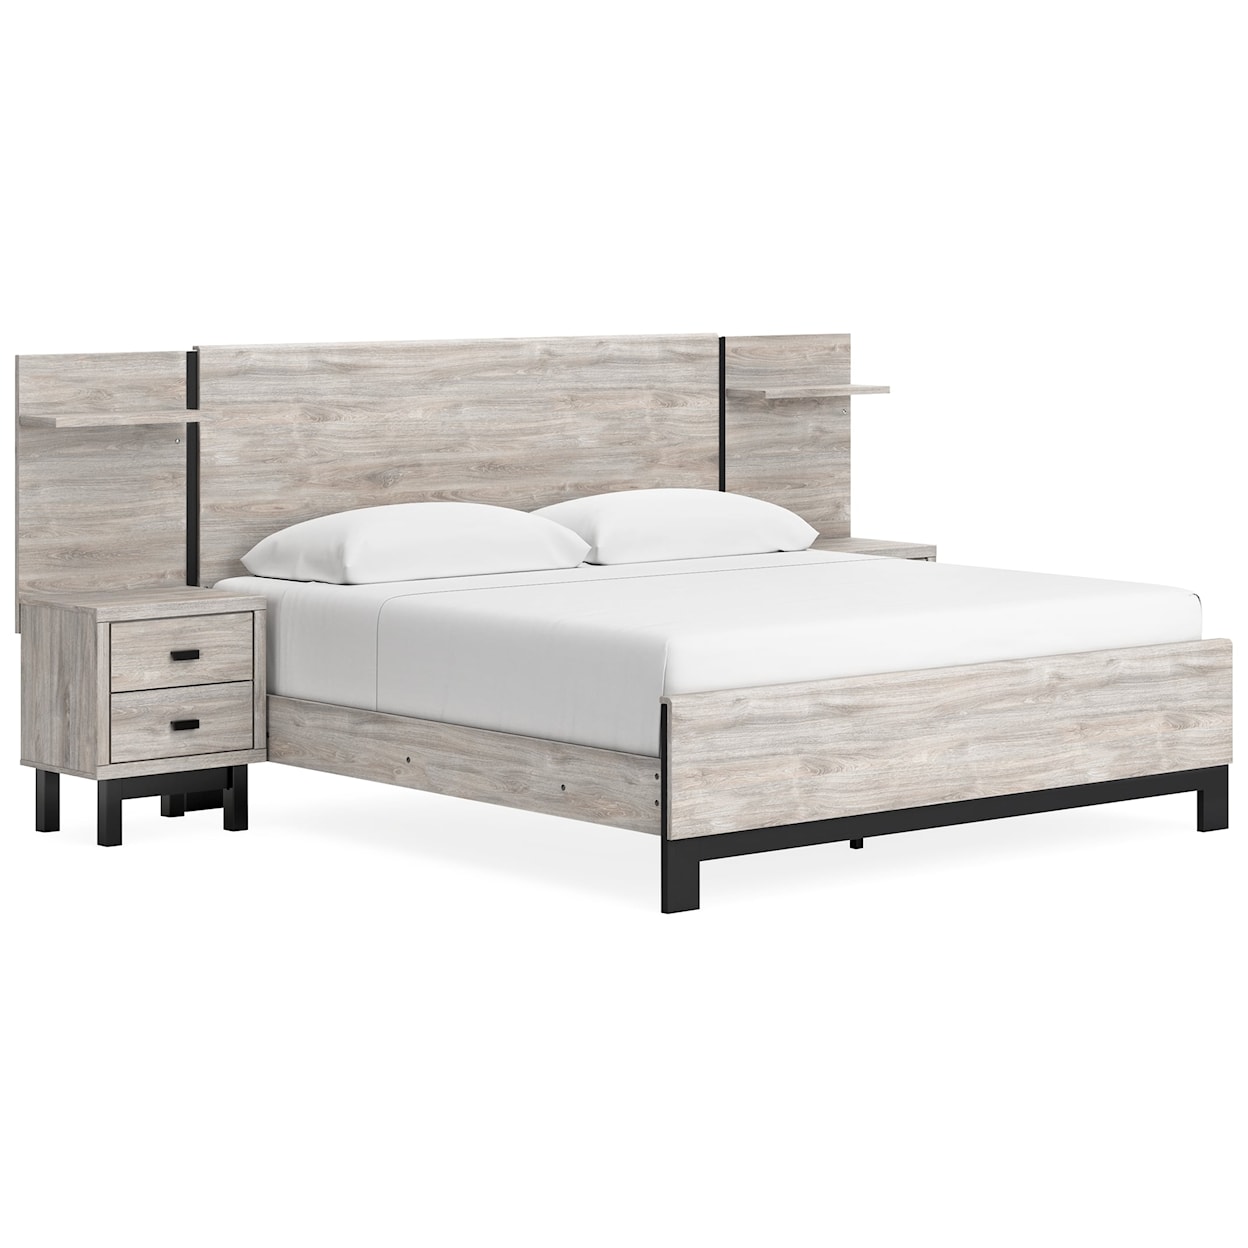 JB King Vessalli King Panel Bed with Extensions